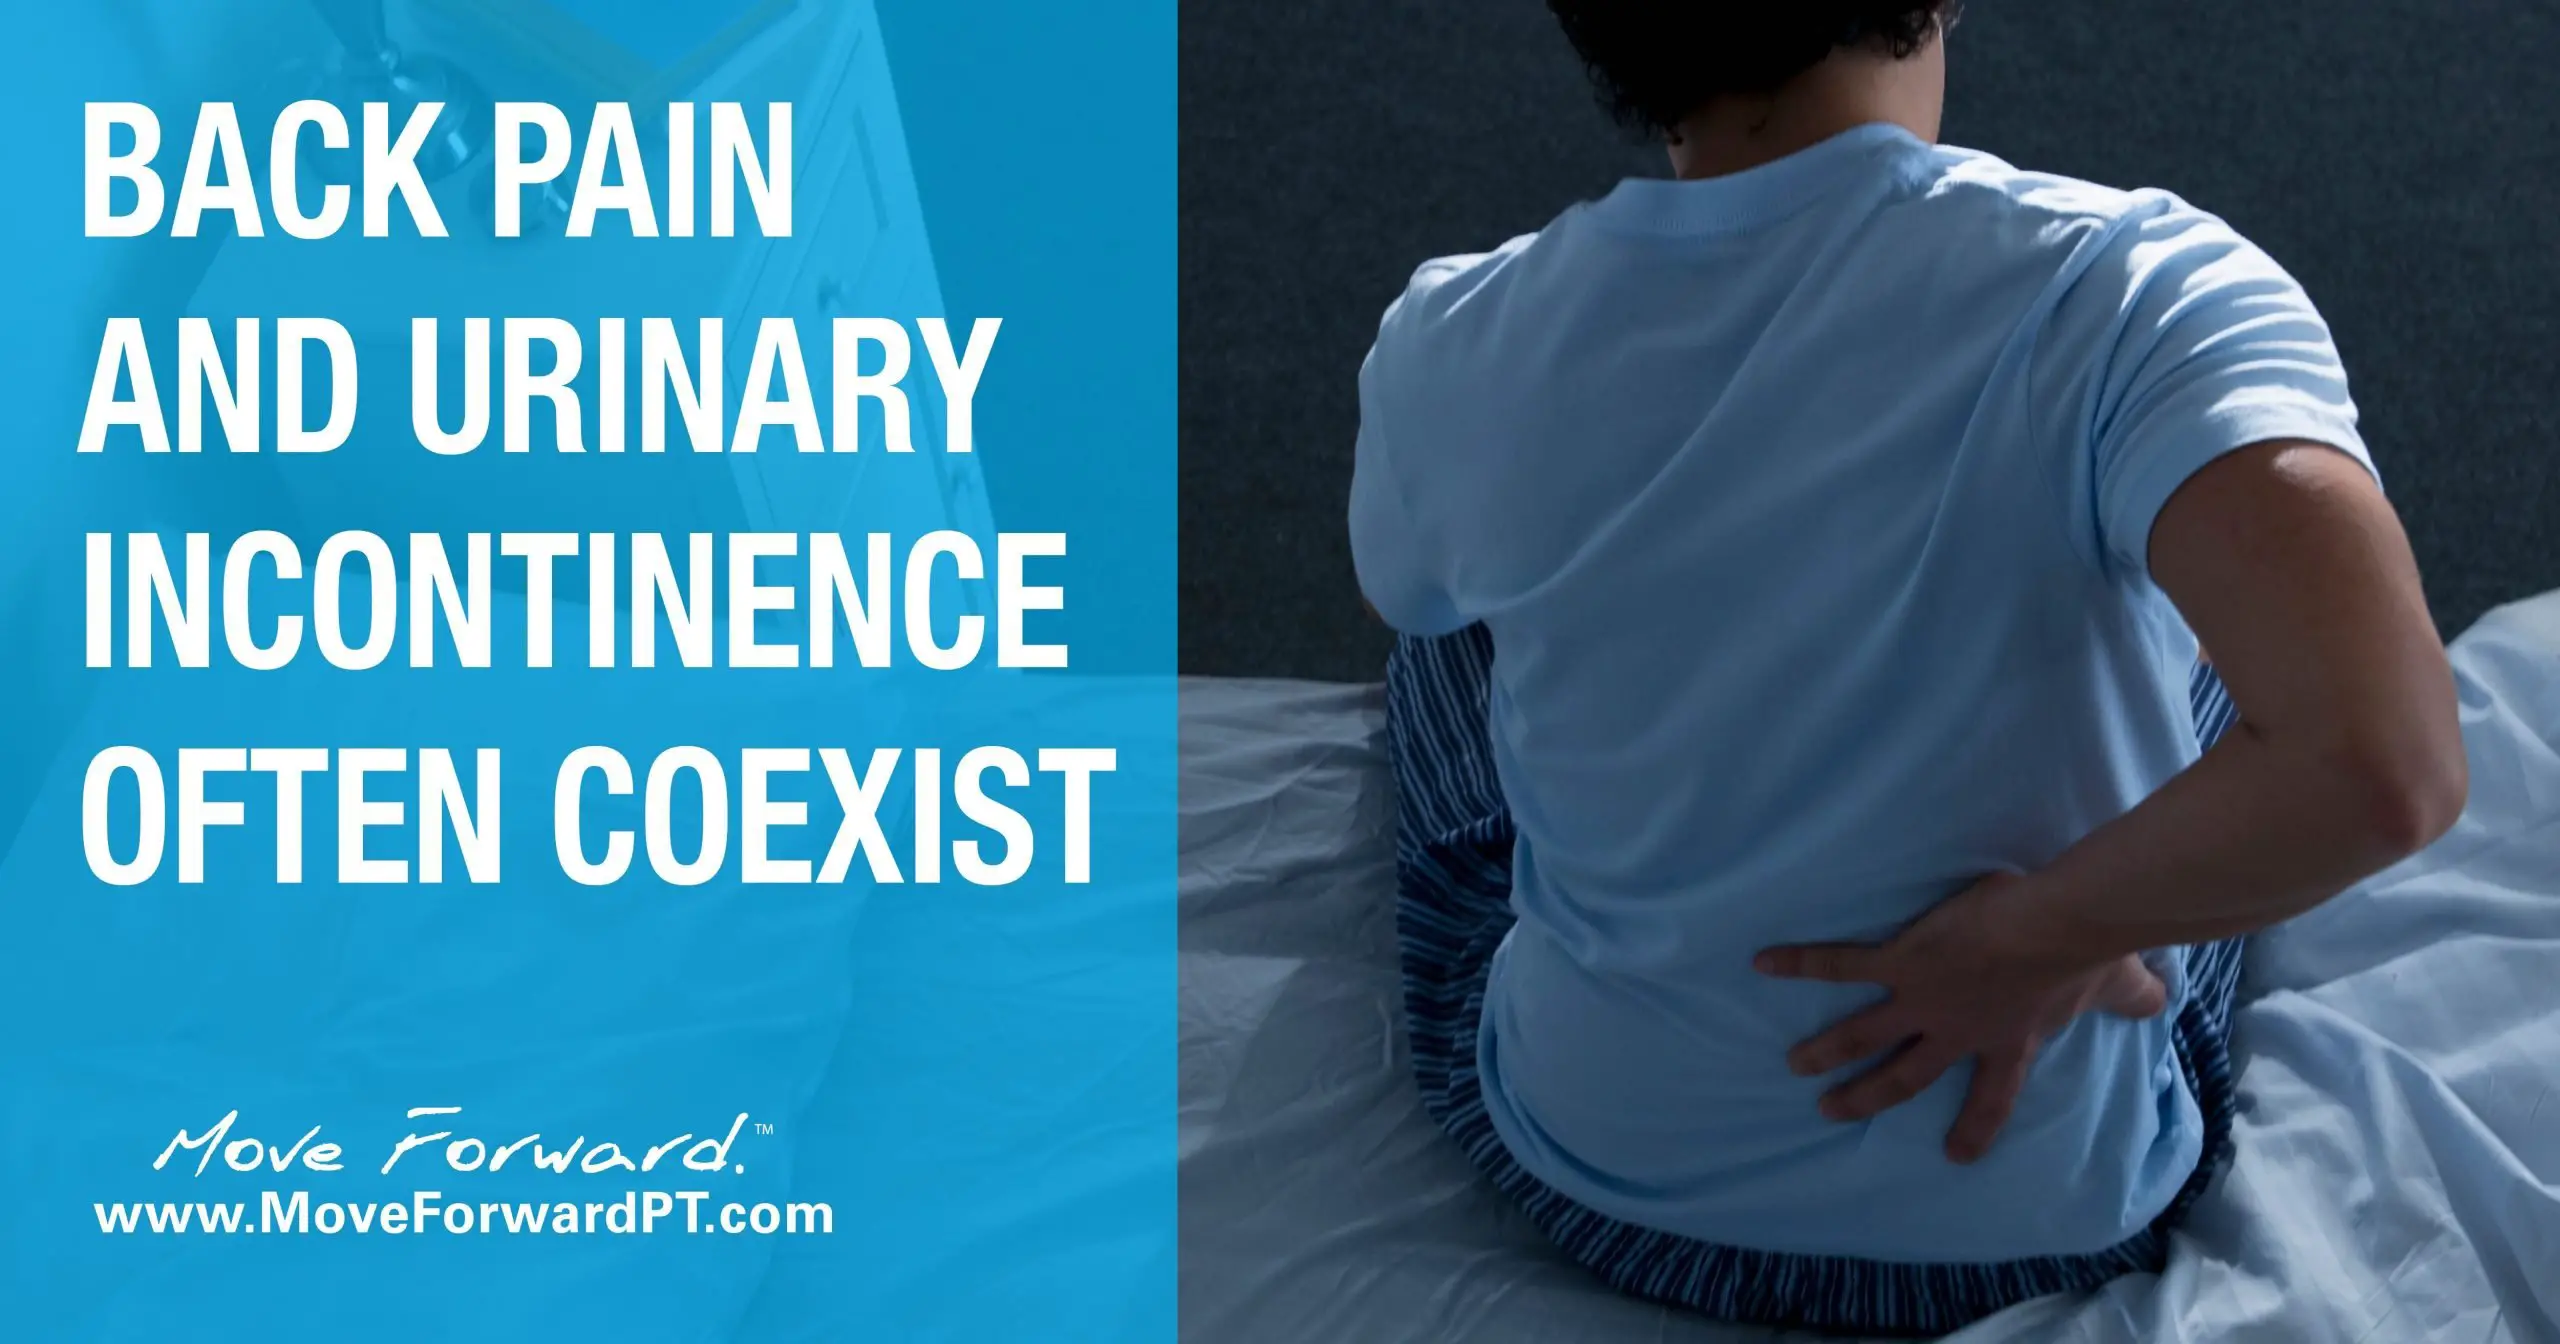 Pin on Urinary incontinence in men